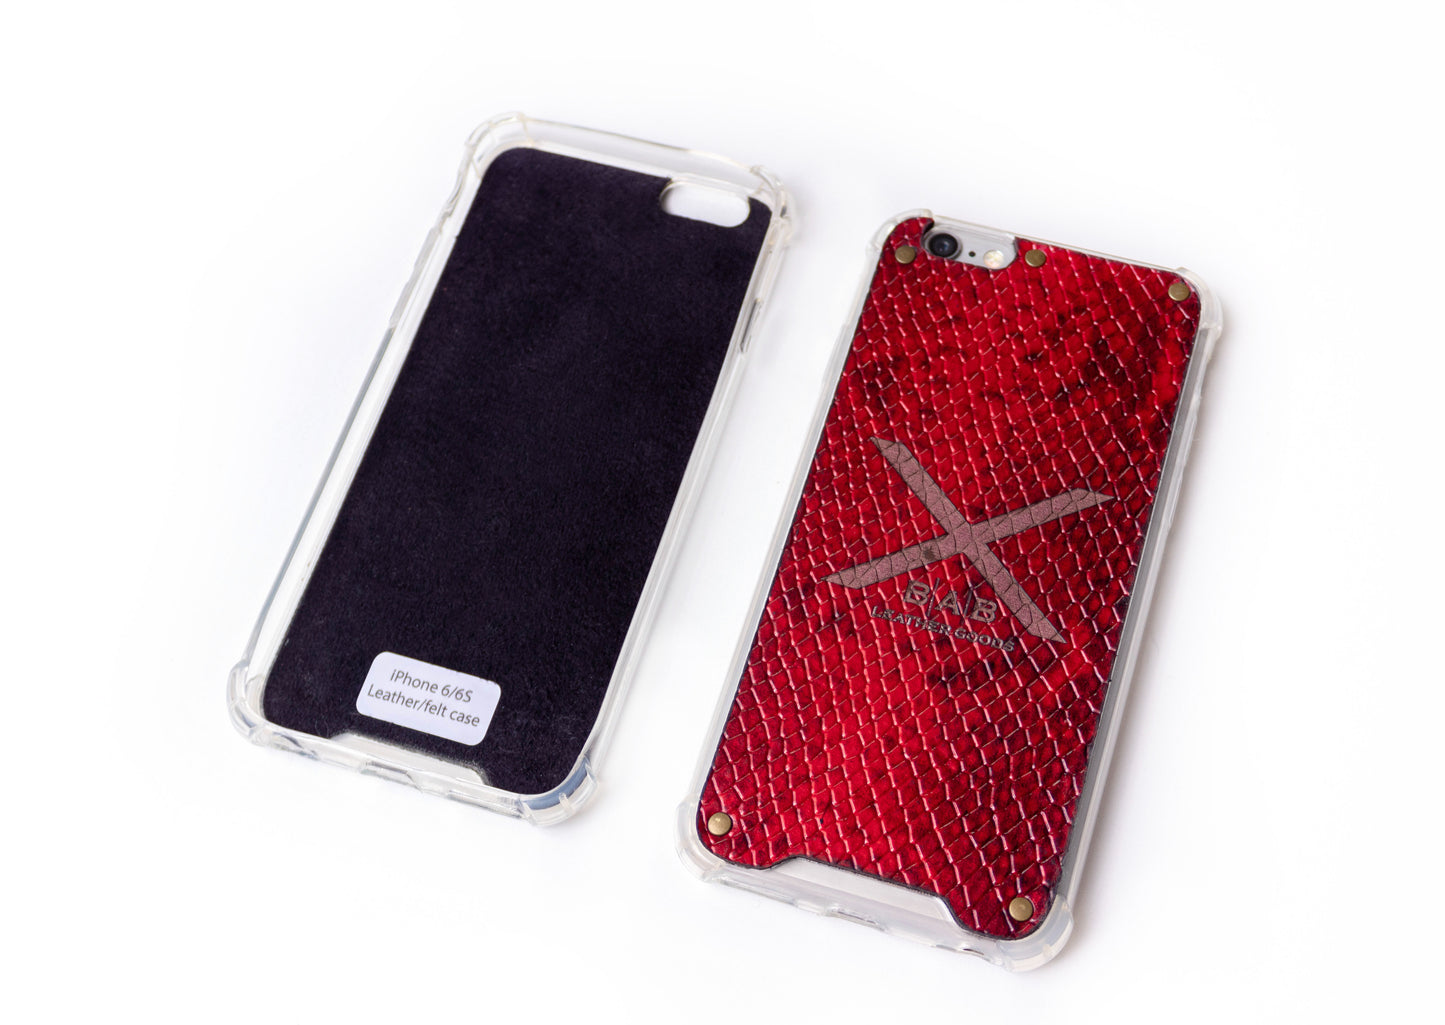 Textured Red Python Patent Genuine Leather iPhone Case cut and laser engraved, 5 Bronze Rivets.- F36